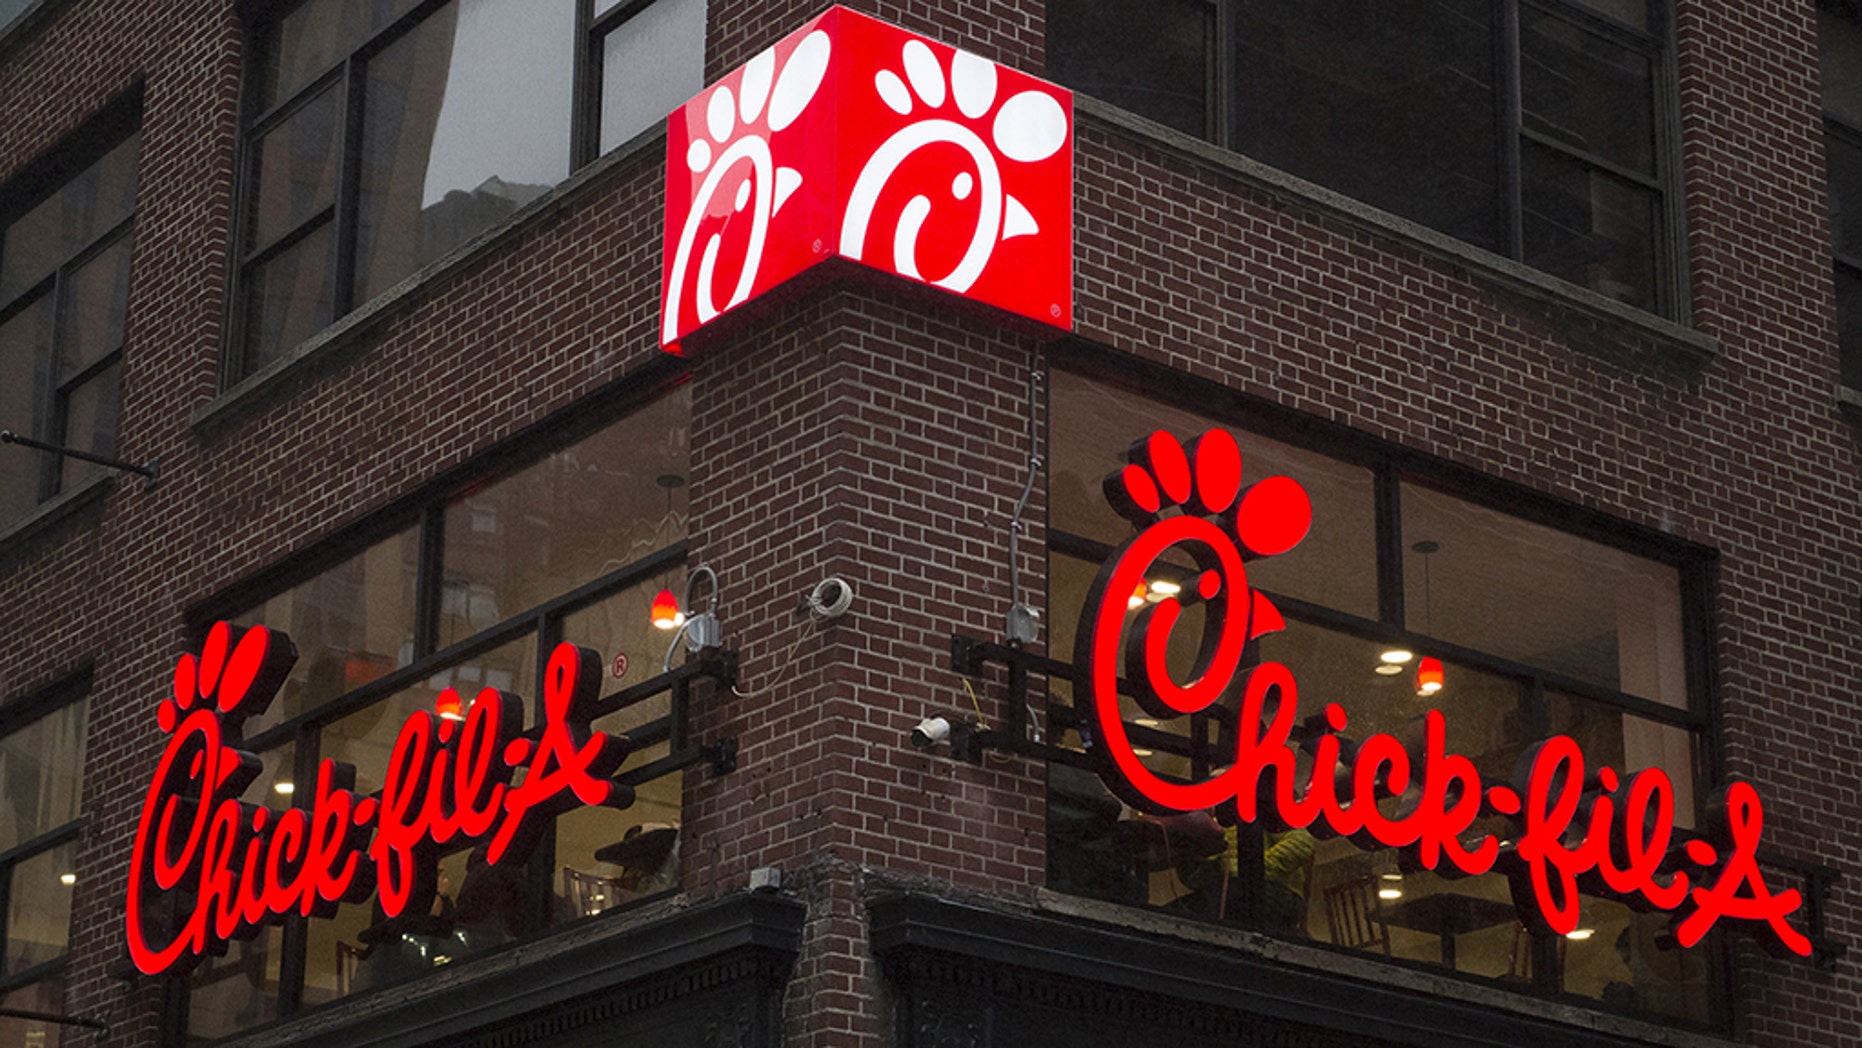 ChickfilA announces plans for first international location in Toronto